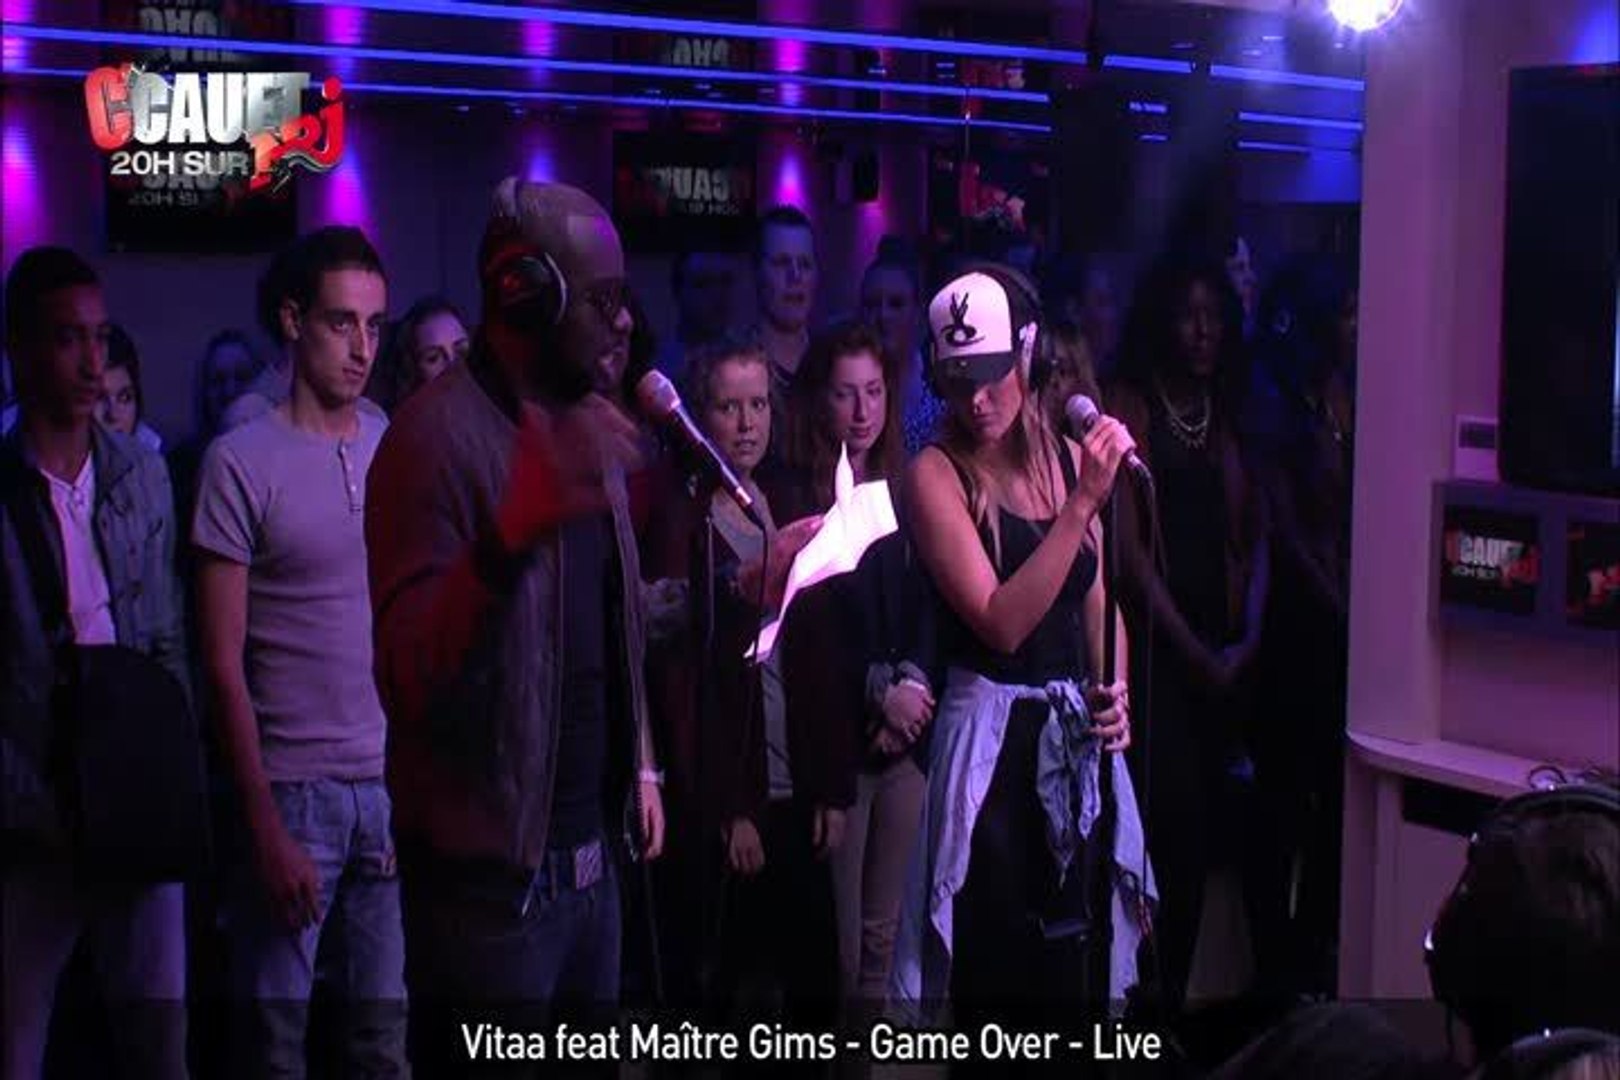 Vitaa feat Maître Gims - Game Over - Live - Vidéo Dailymotion